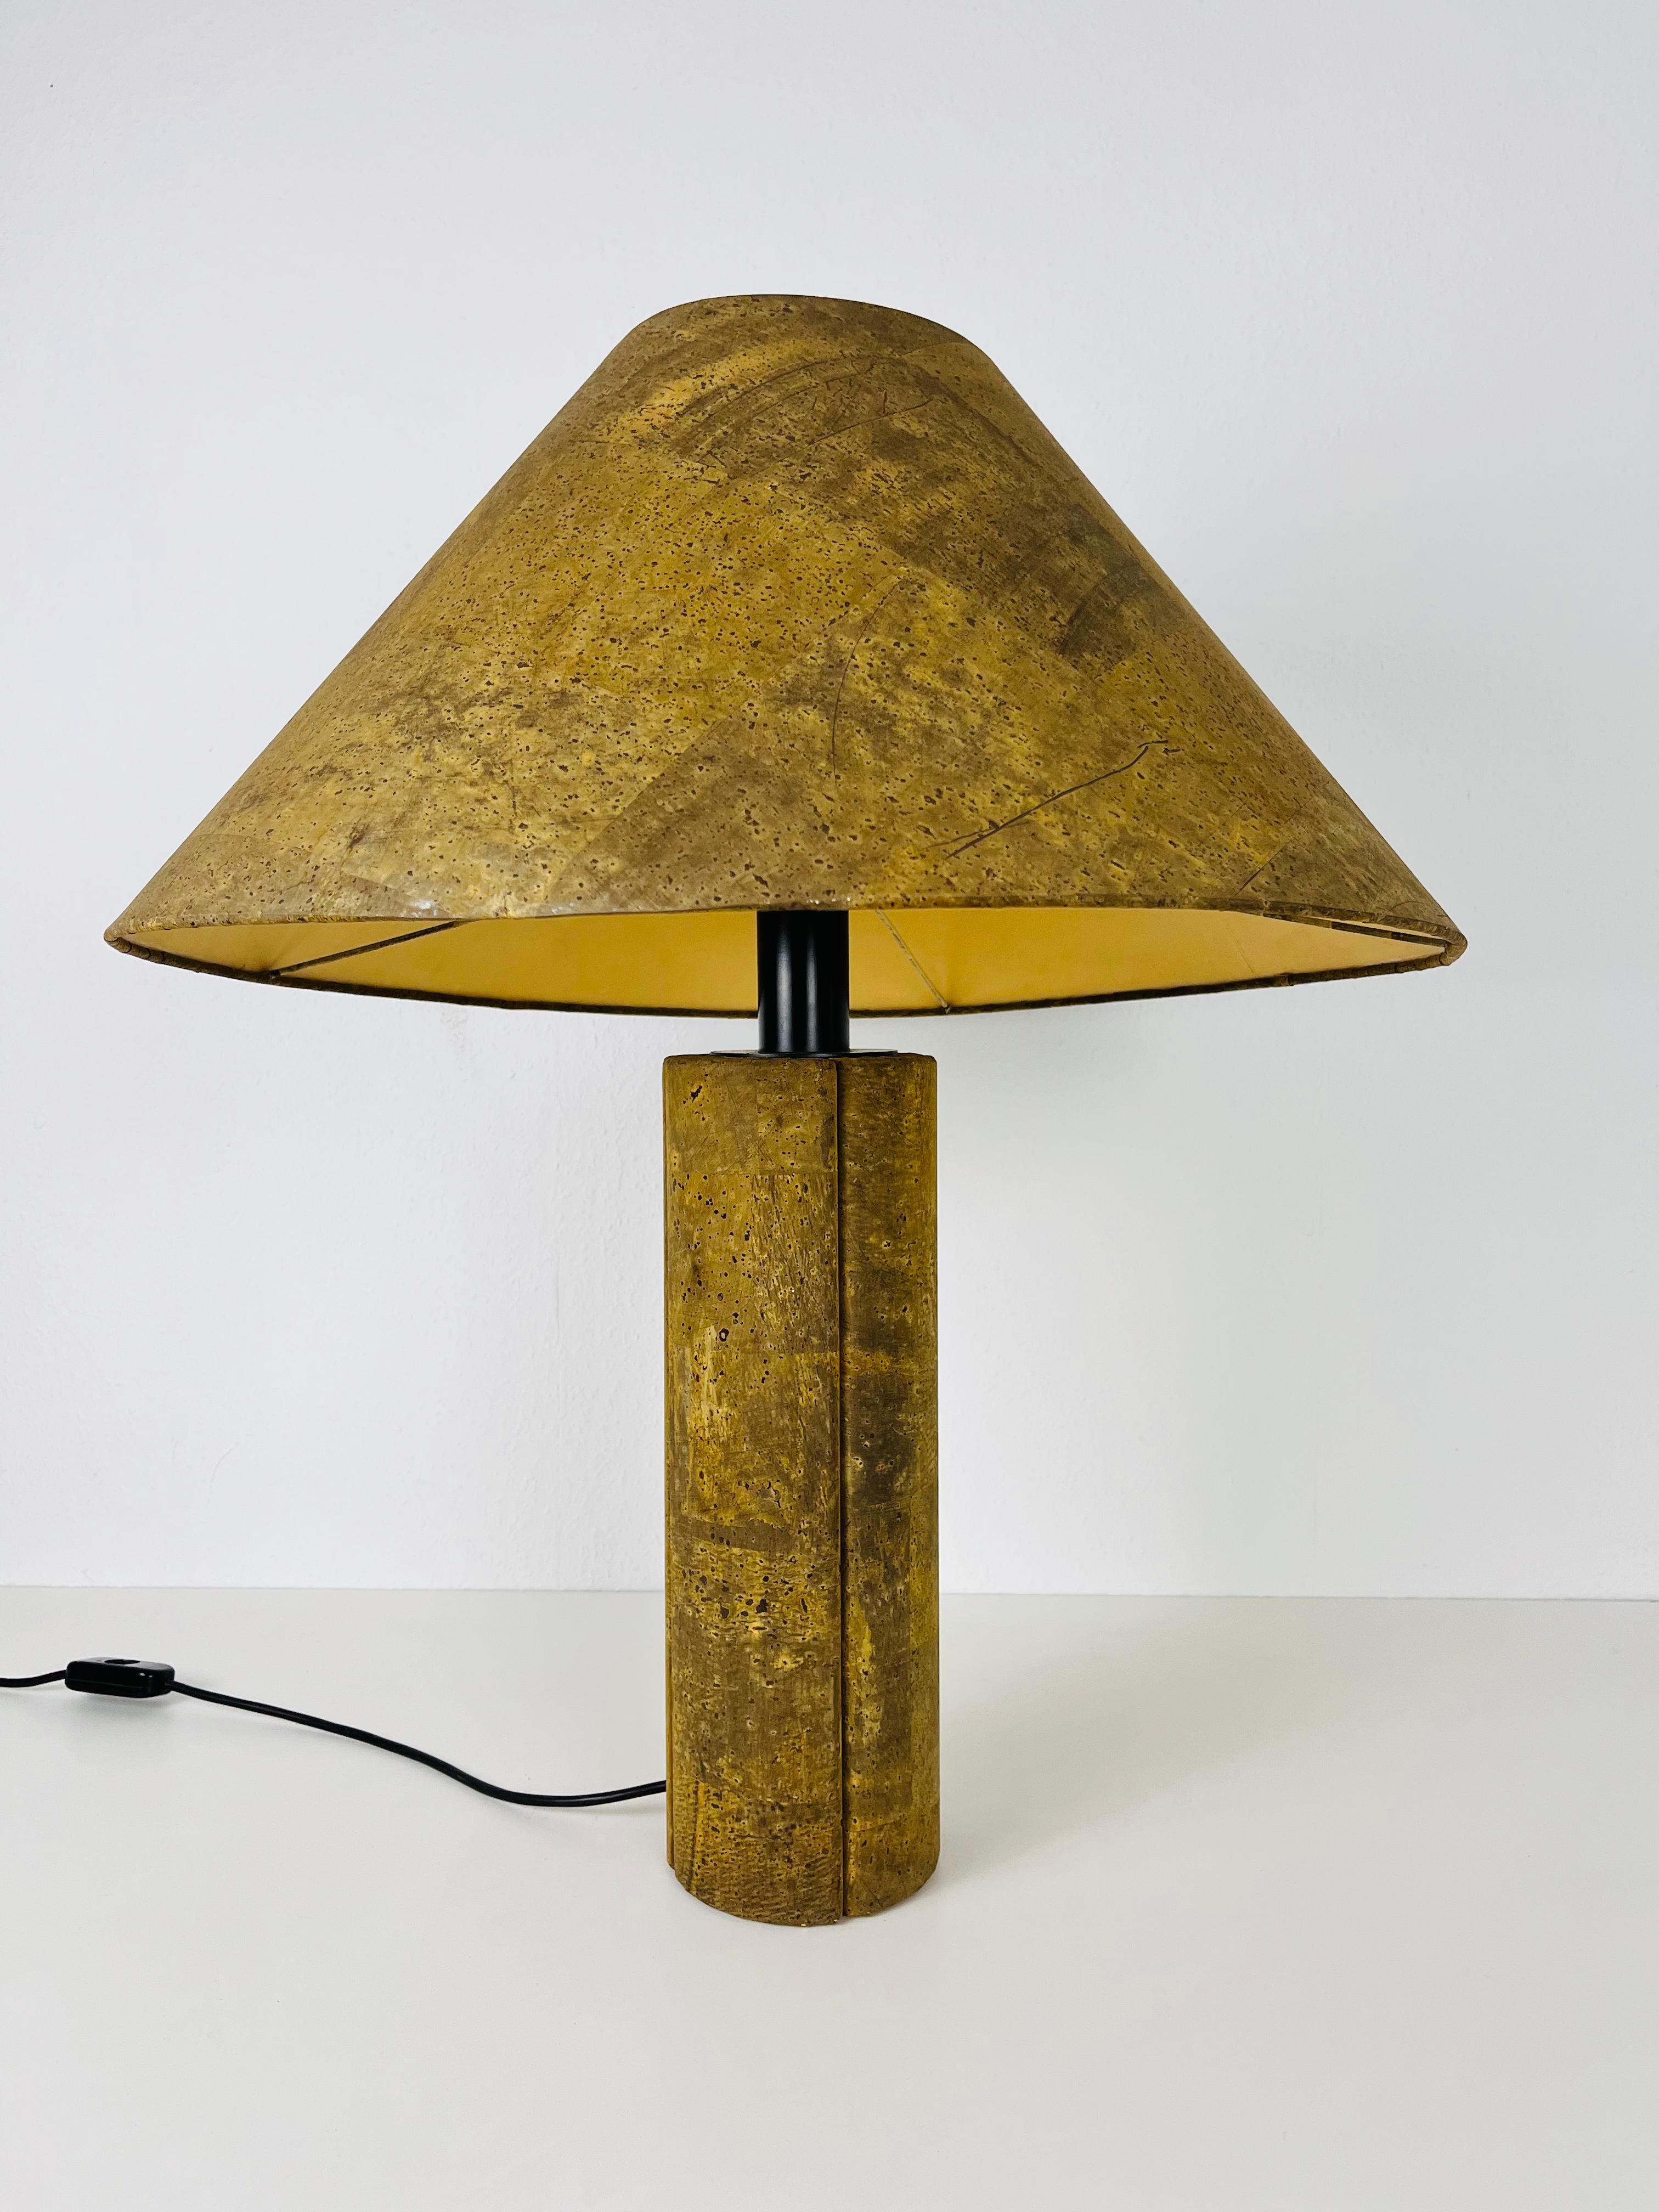 Mid-20th Century Cork Table Lamp by Ingo Maurer for M Design, 1960s, Germany